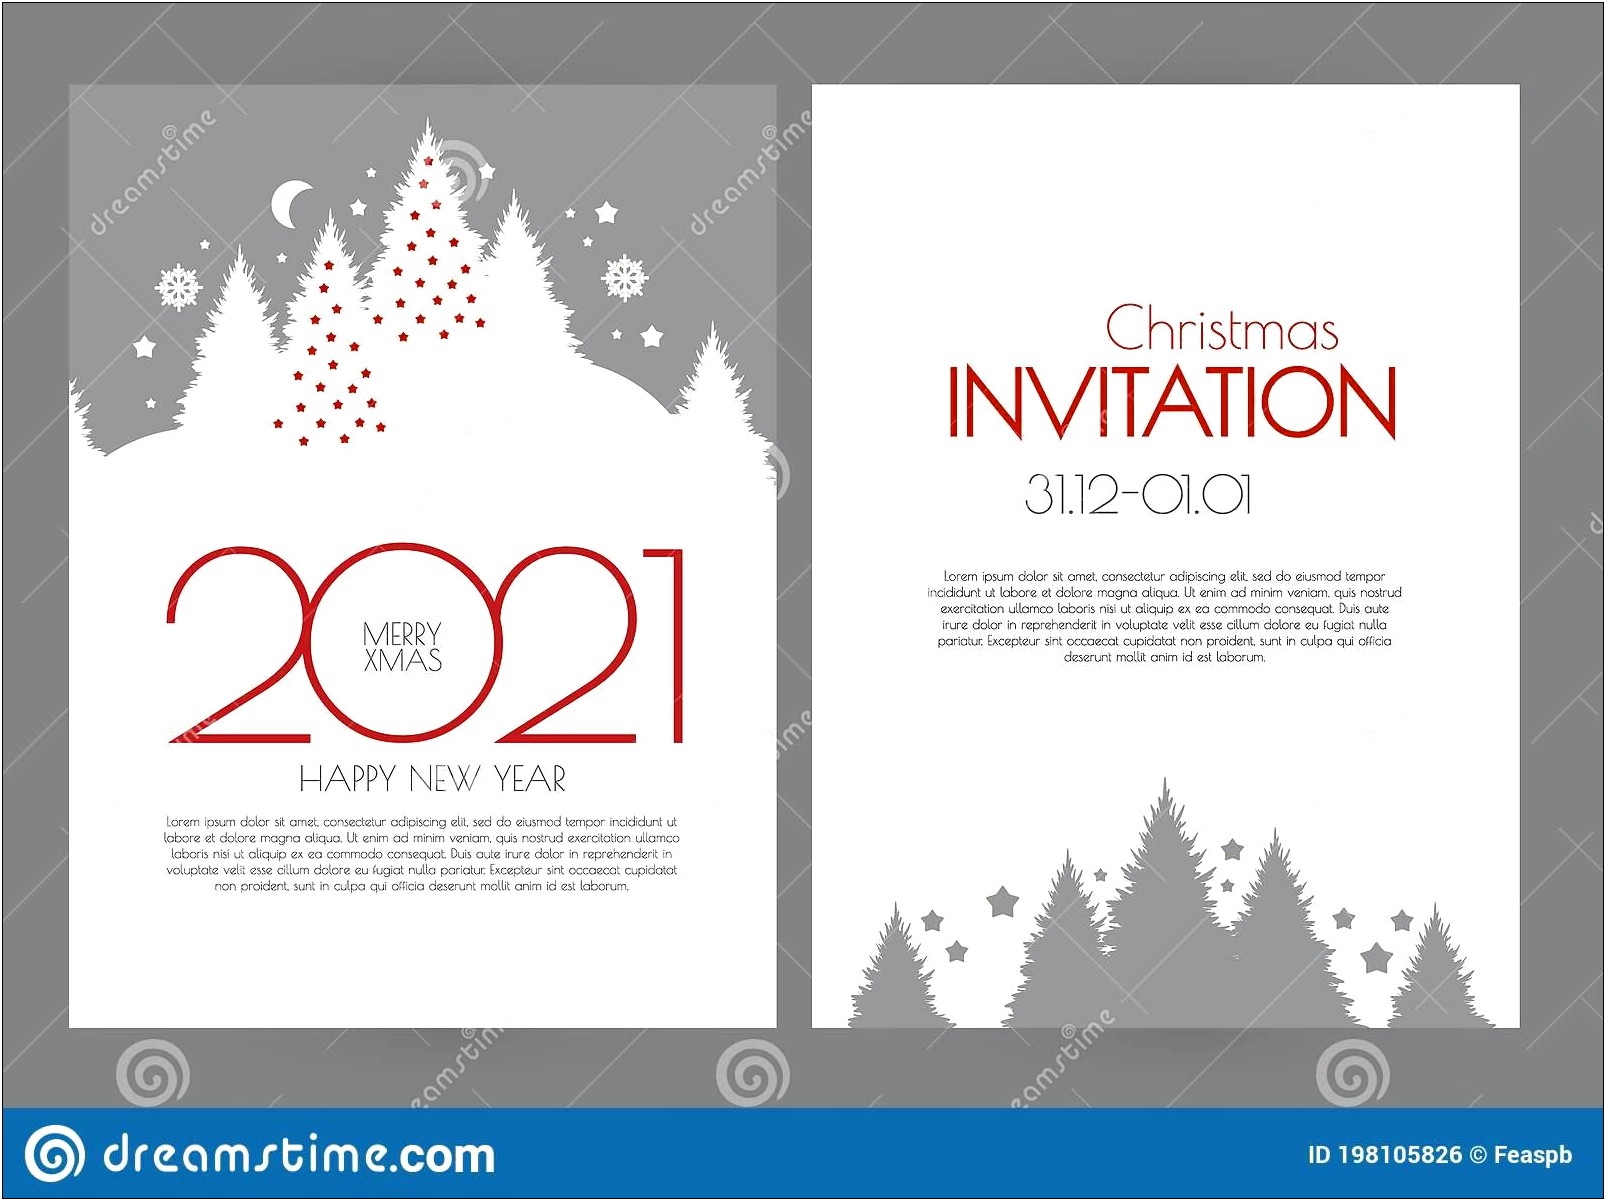 Free Happy New Year Flyer Templates